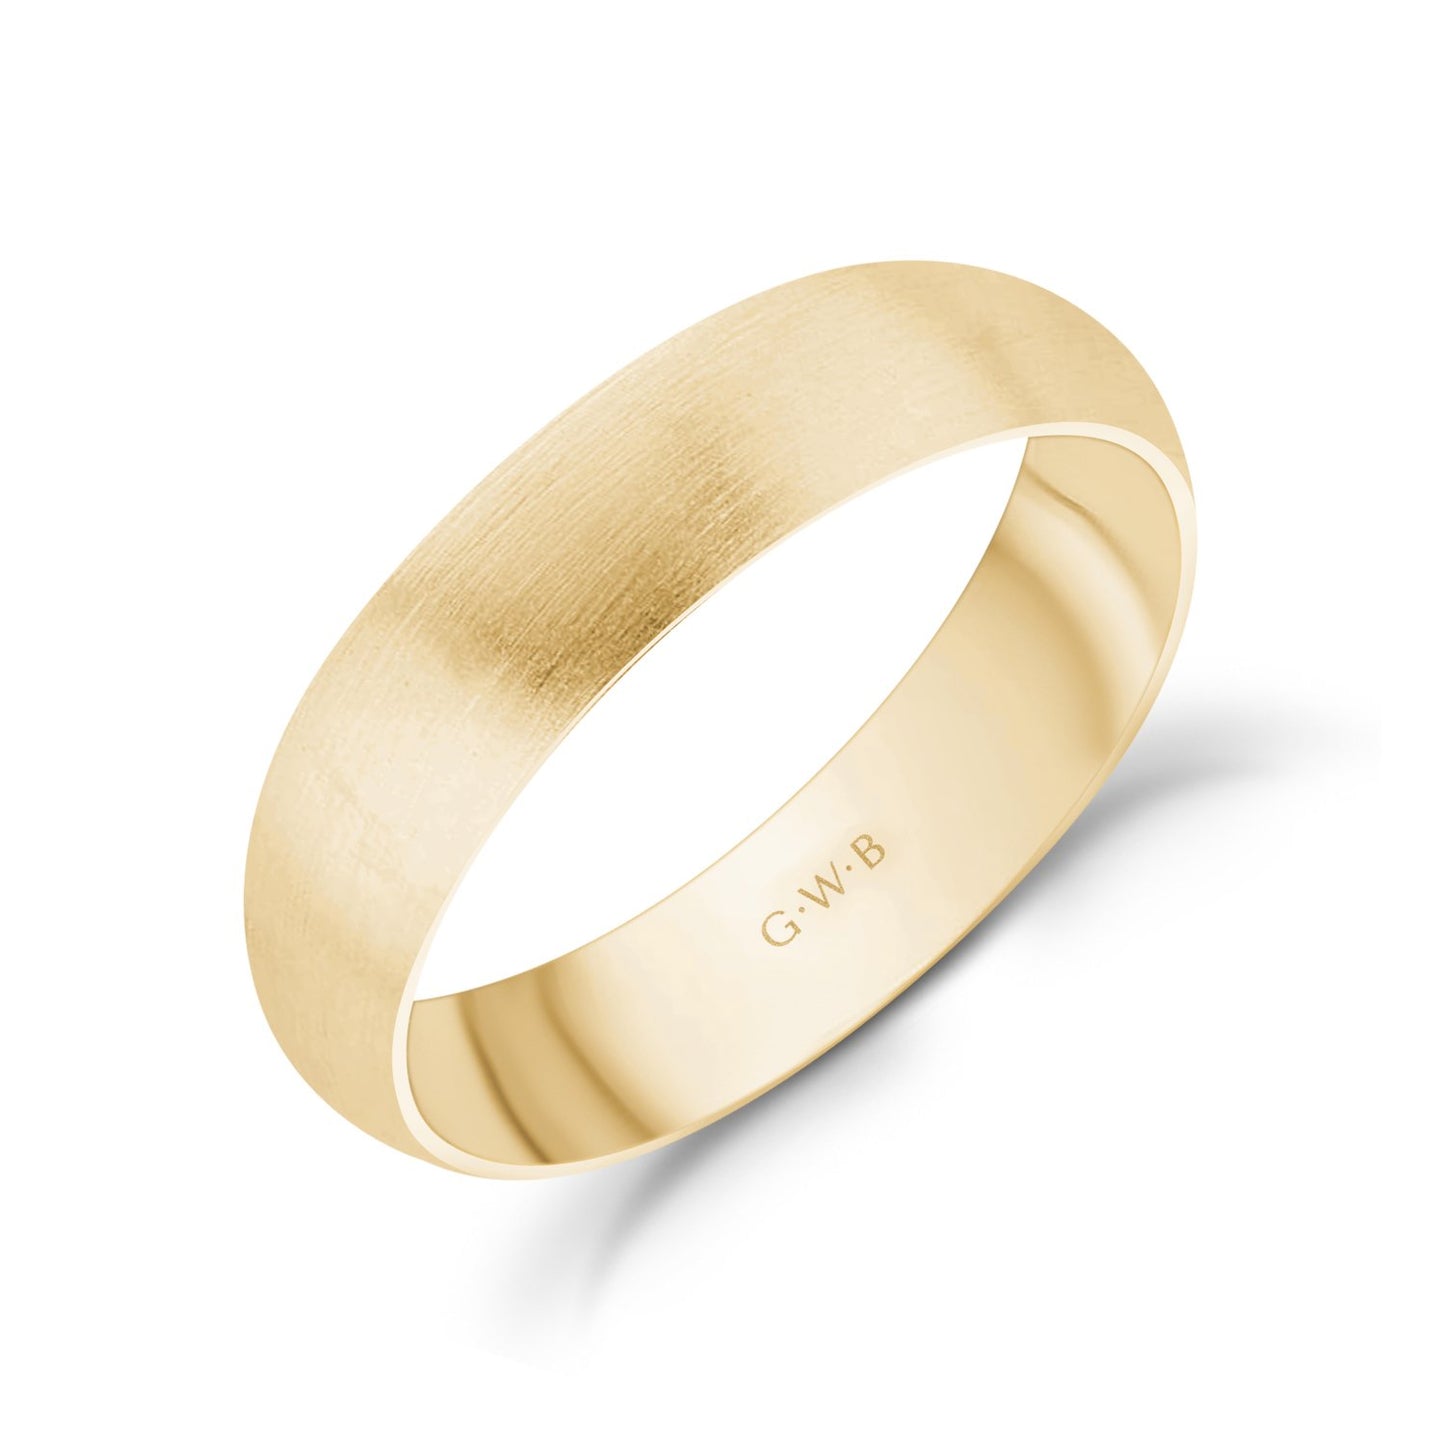 5mm 10K Gold Brushed Dome Wedding Band - G.W Bands